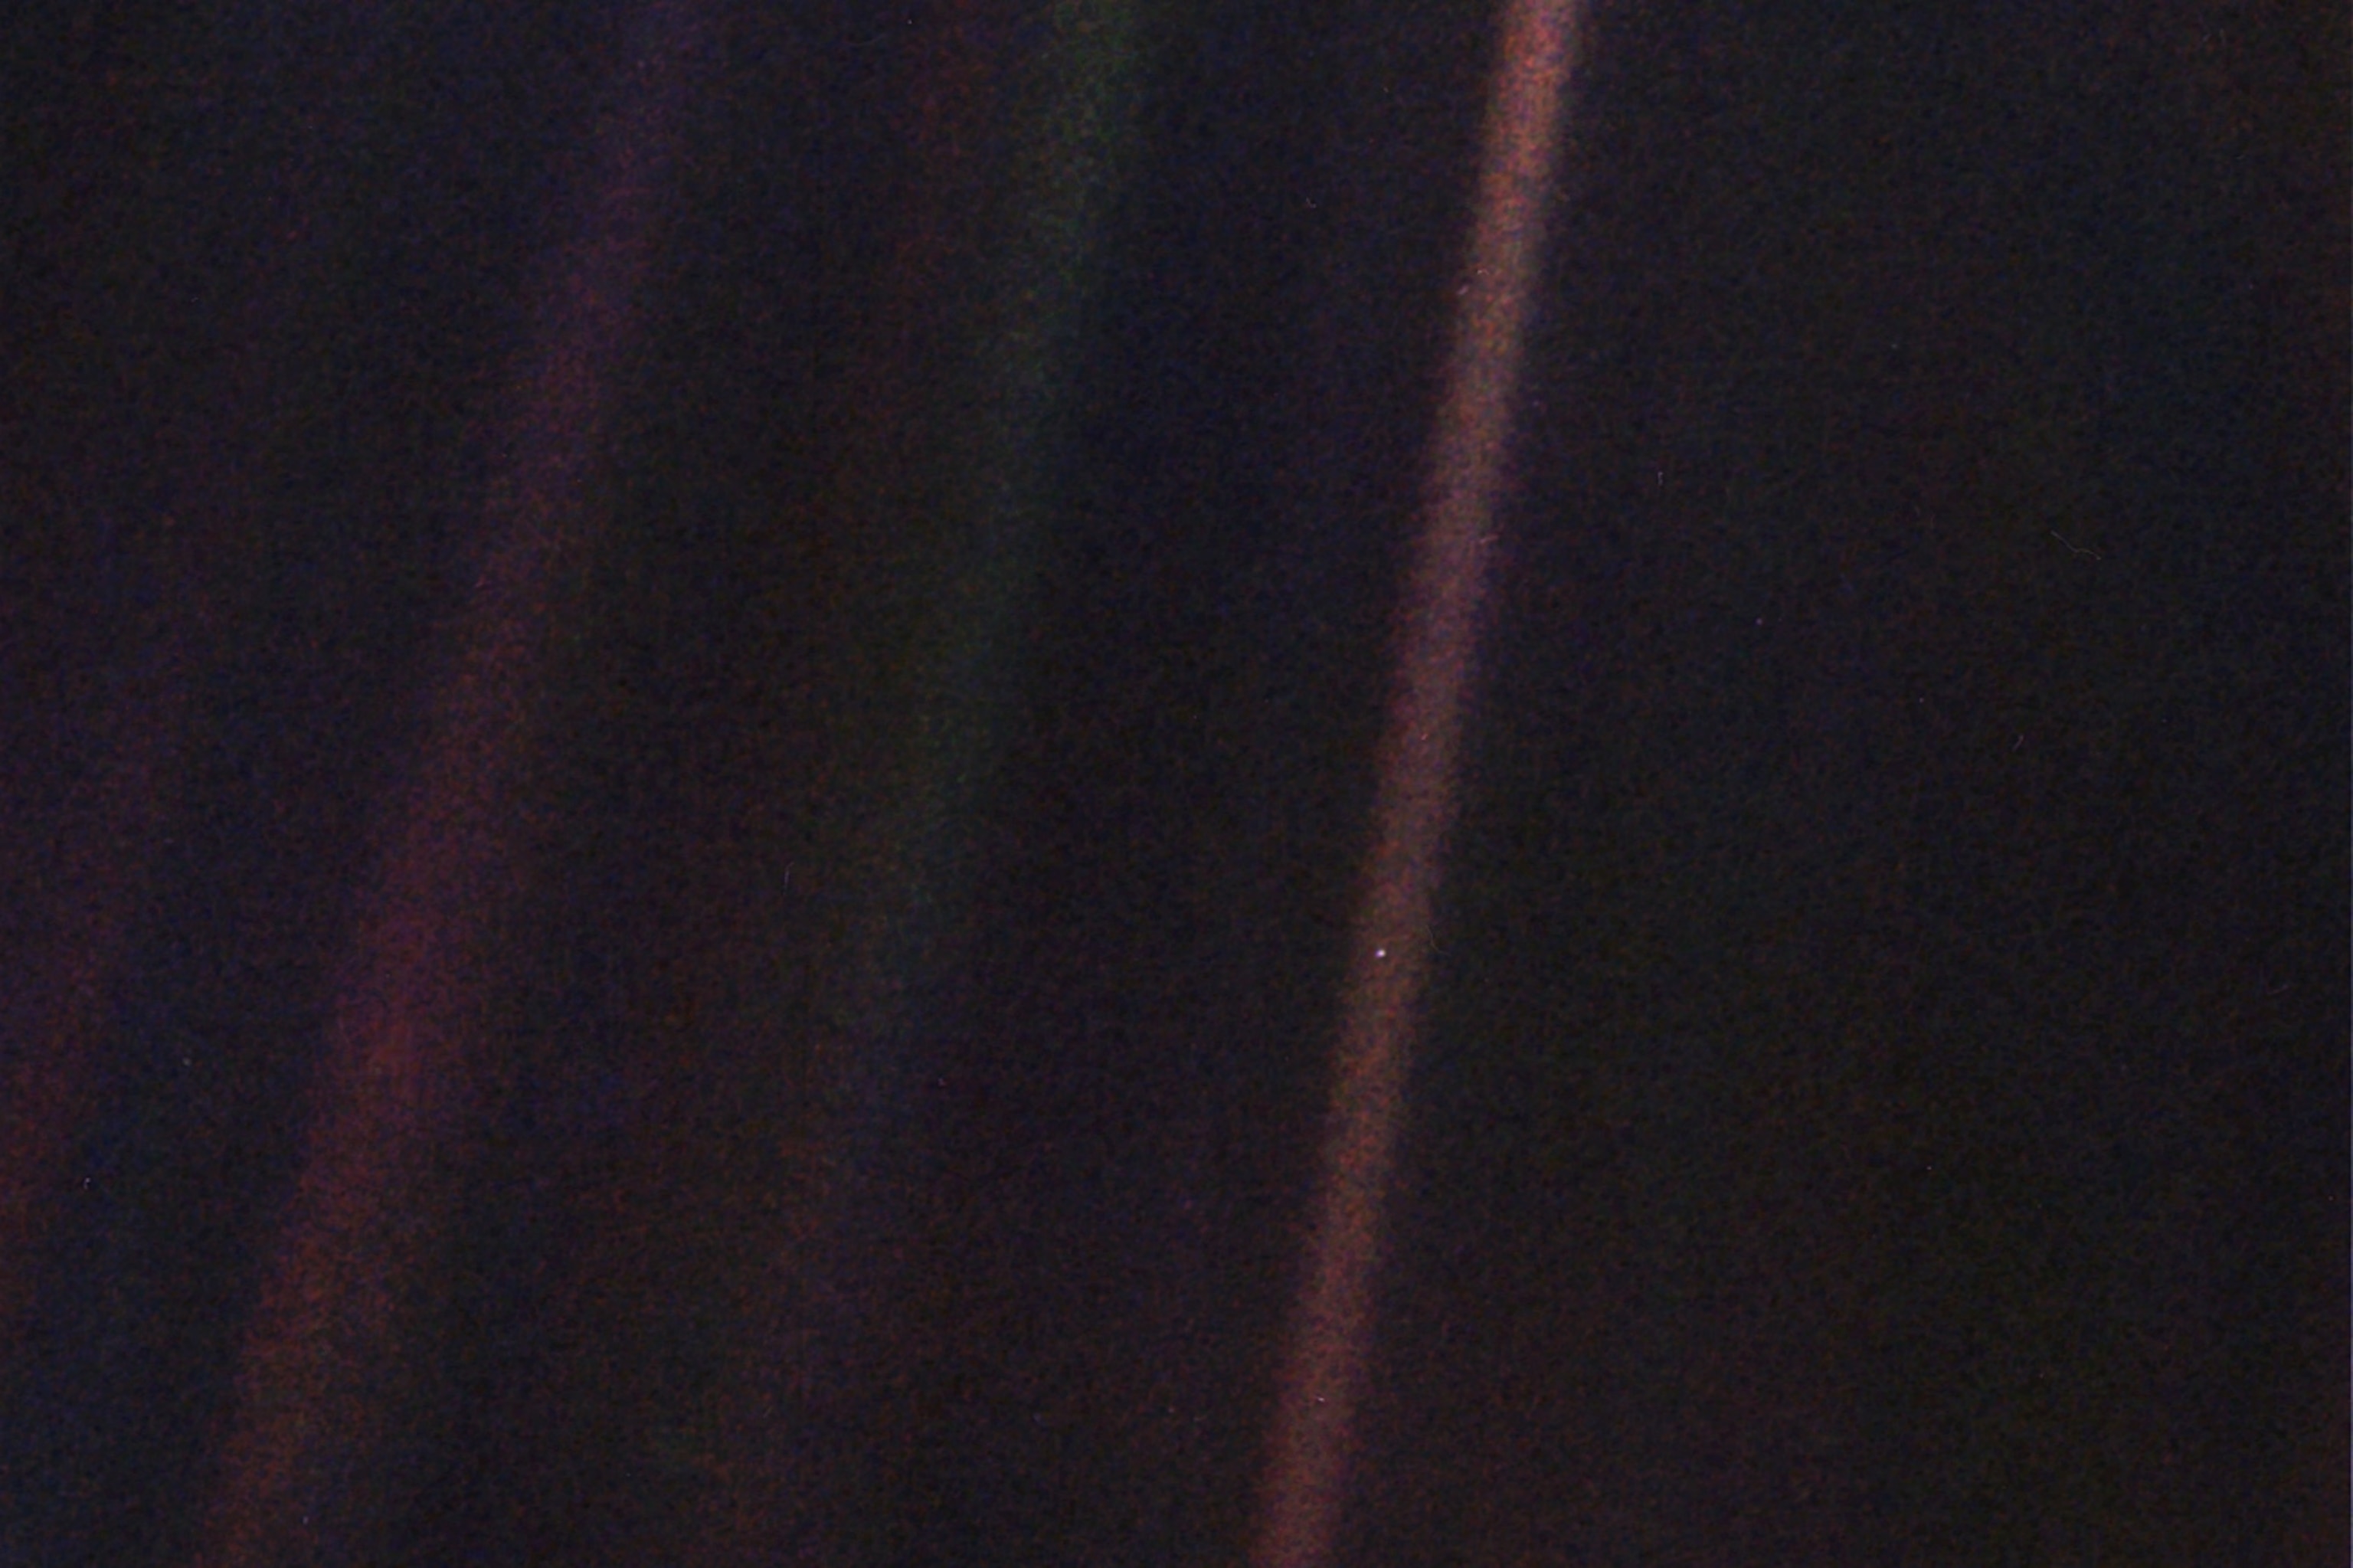 Pale Blue Dot': Meet the scientist who first saw the iconic NASA Voyager image